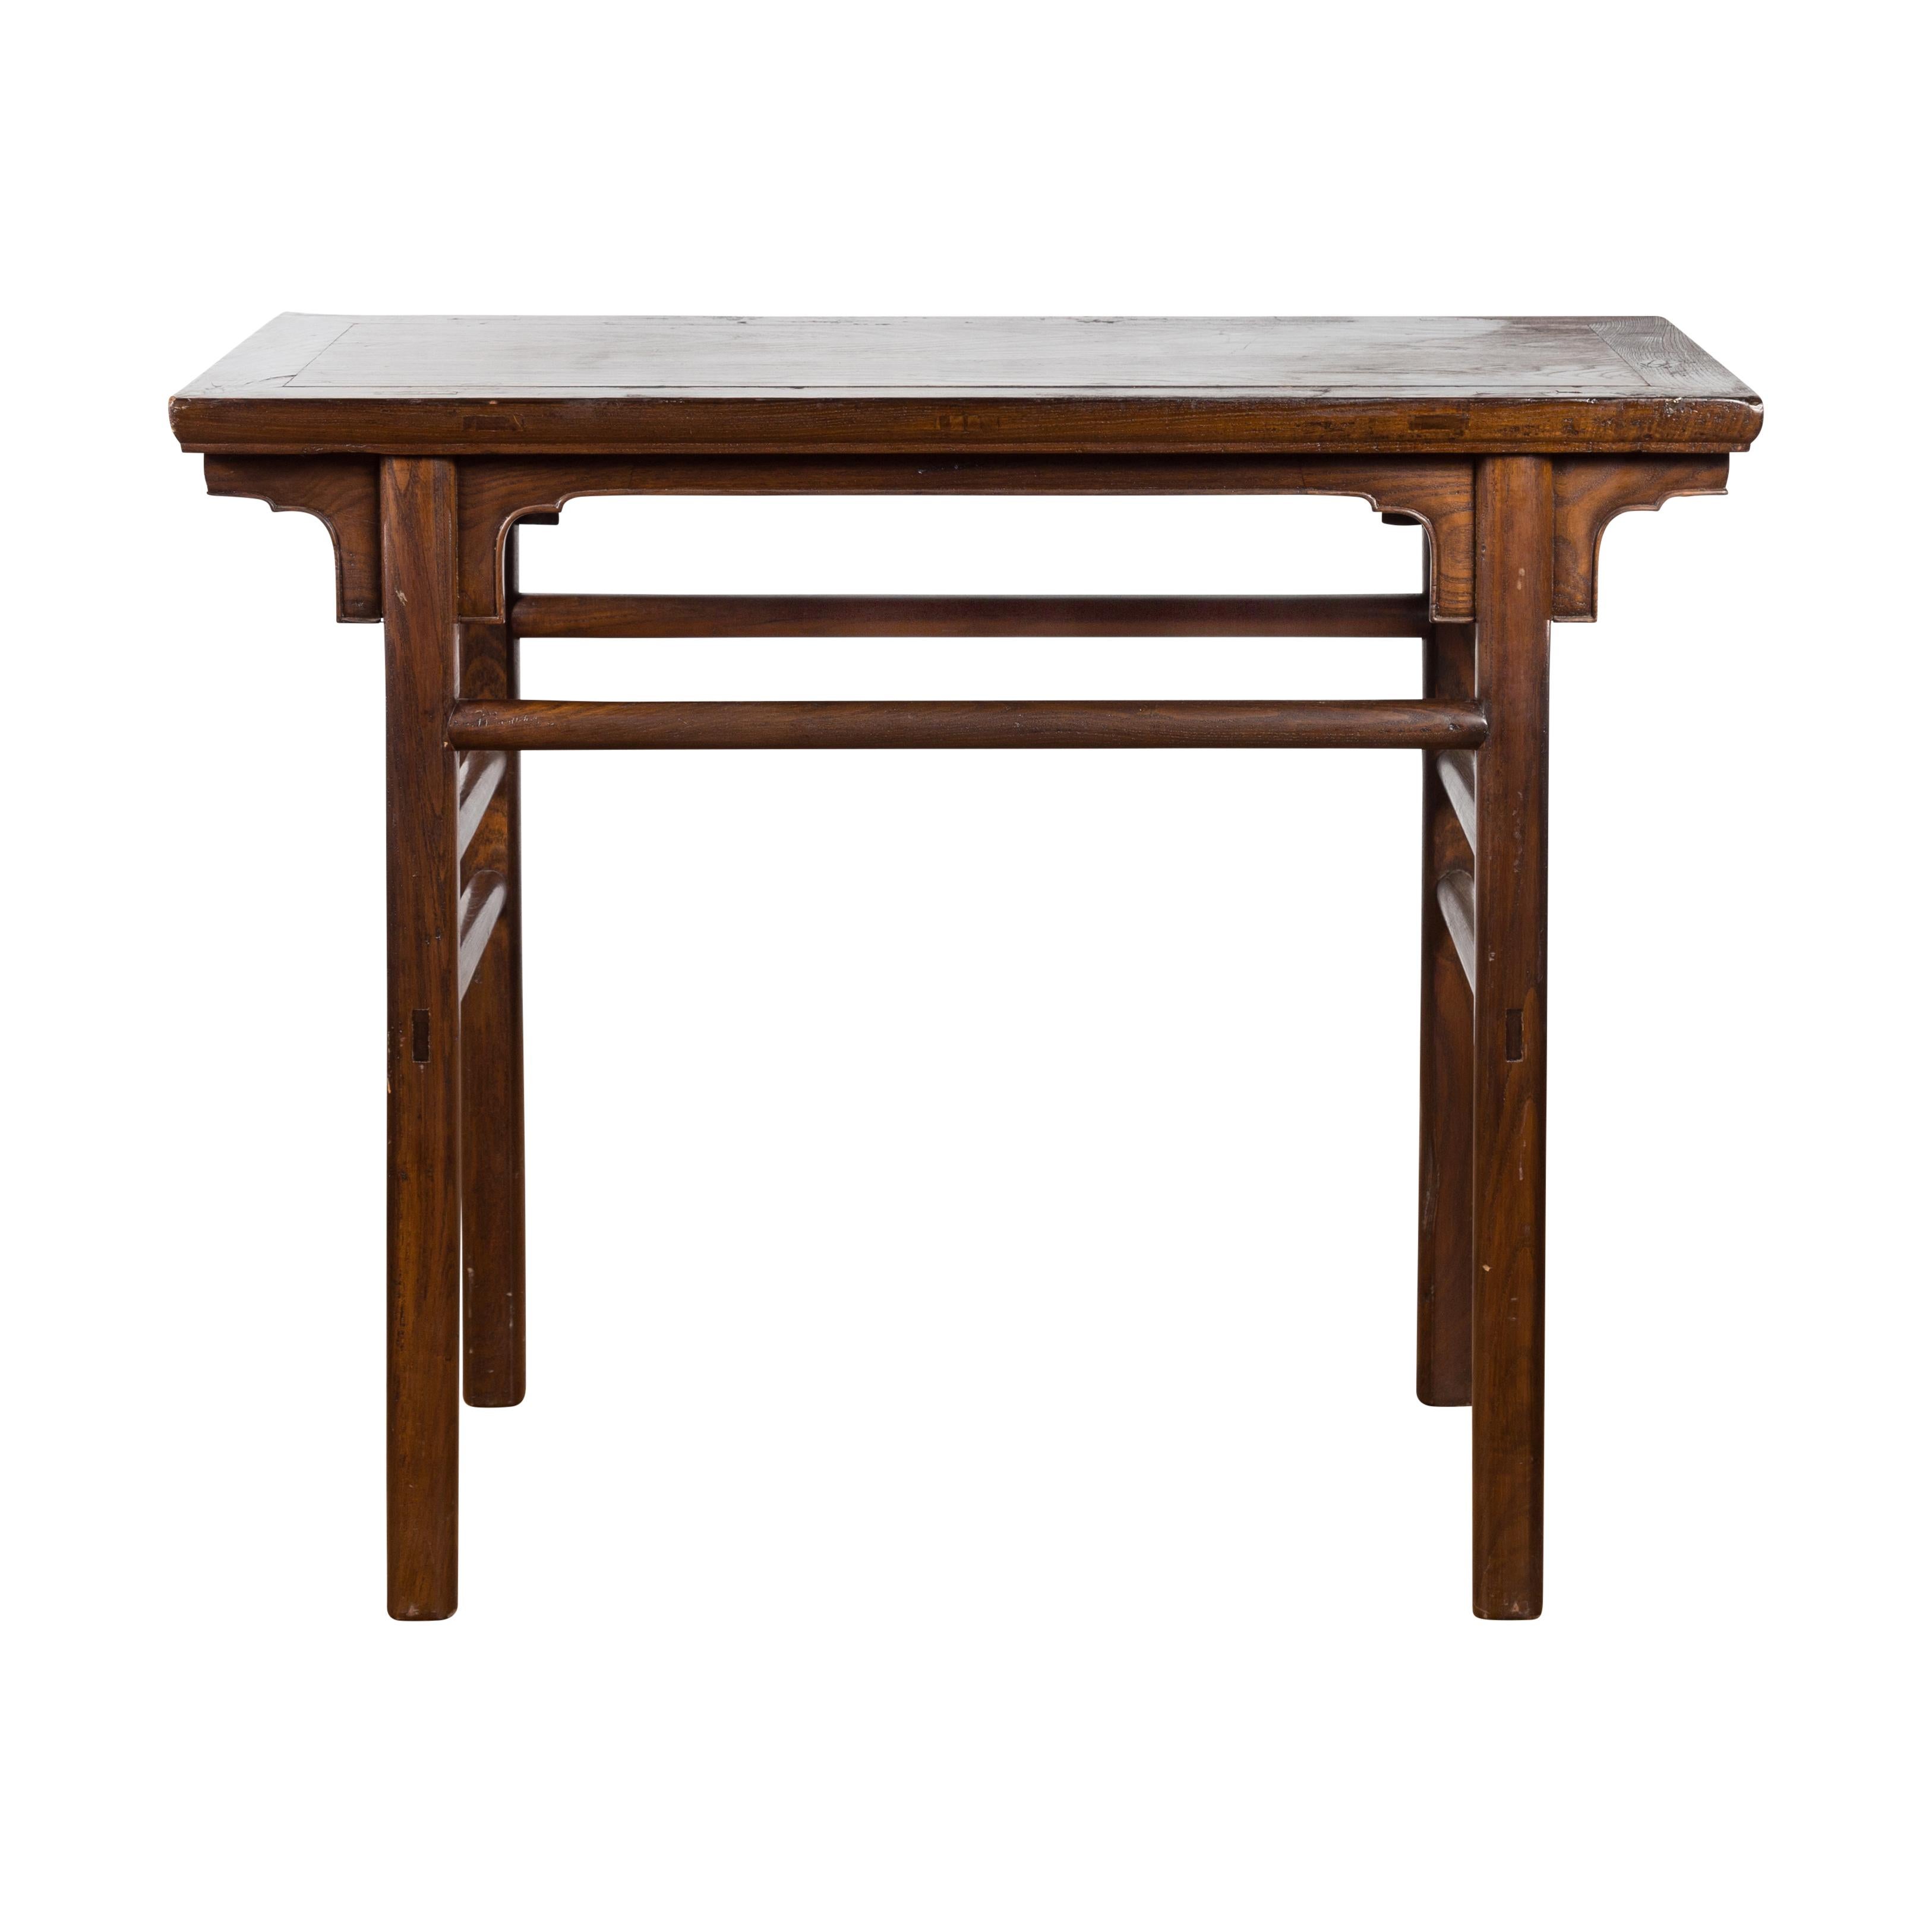 An antique Chinese scholar's altar table from the early 20th century, with carved apron and side stretchers. Created in China during the early years of the 20th century, this scholar's altar table features a rectangular top with central board,